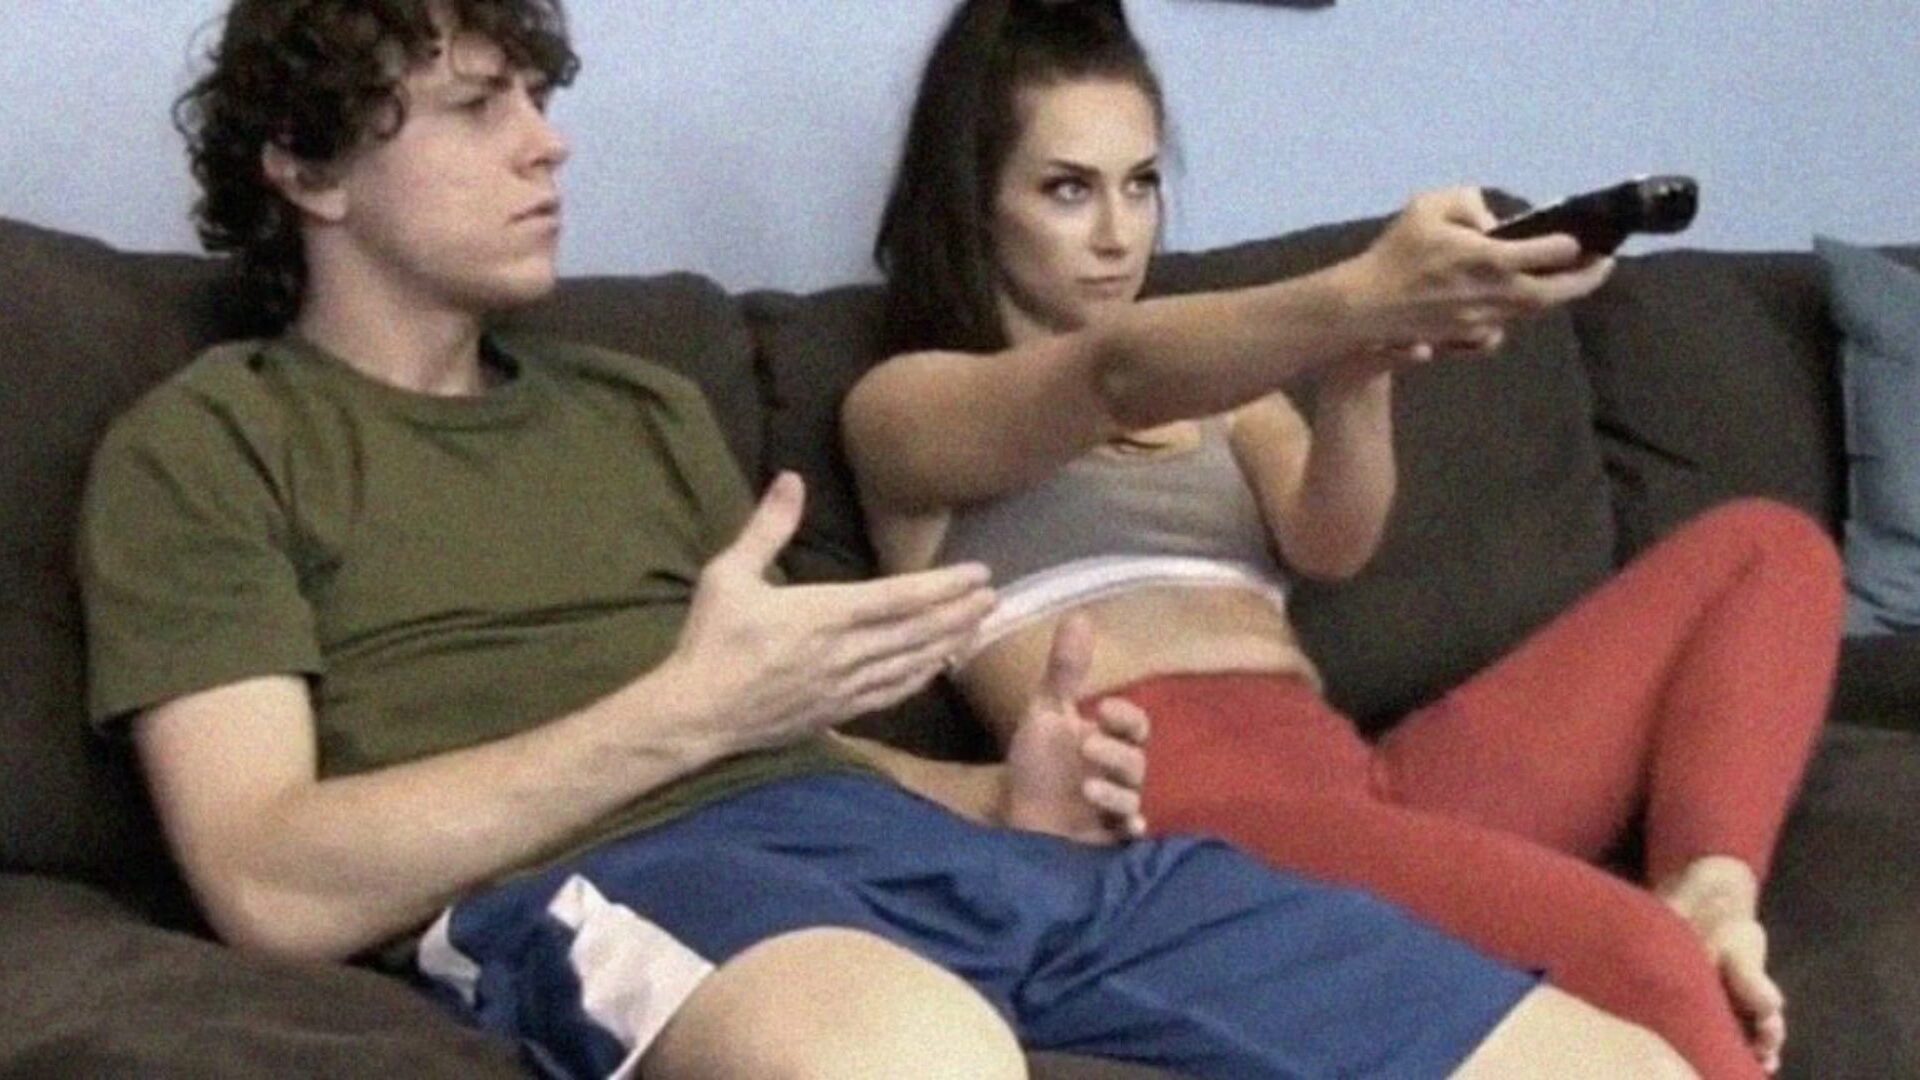 Mischievous Step Sister Jerks off Step Brother on the Couch